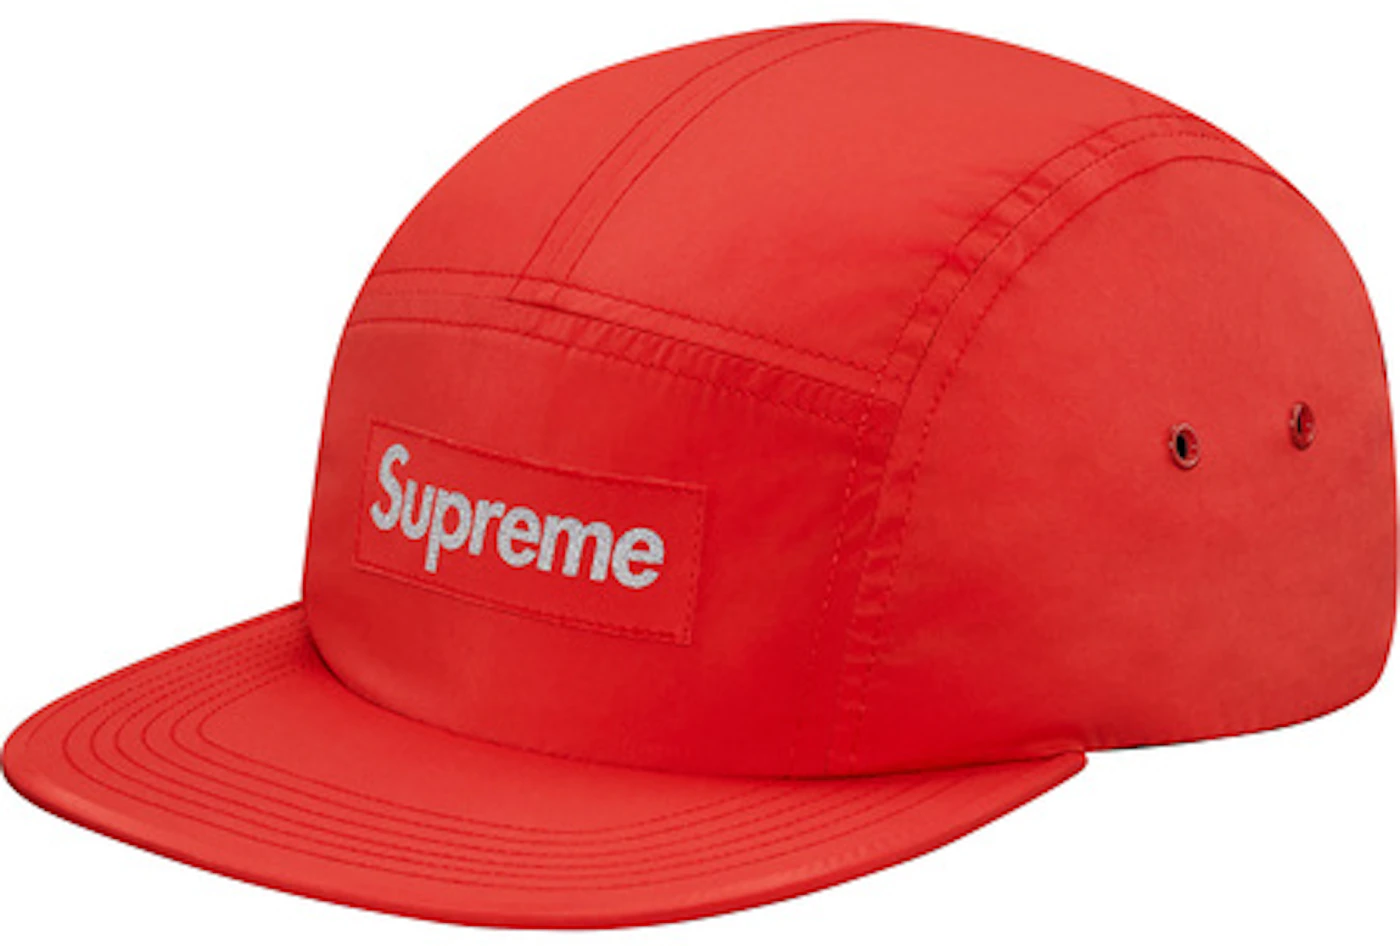 Supreme - SUPREME S LOGO CAMP CAP  HBX - Globally Curated Fashion and  Lifestyle by Hypebeast